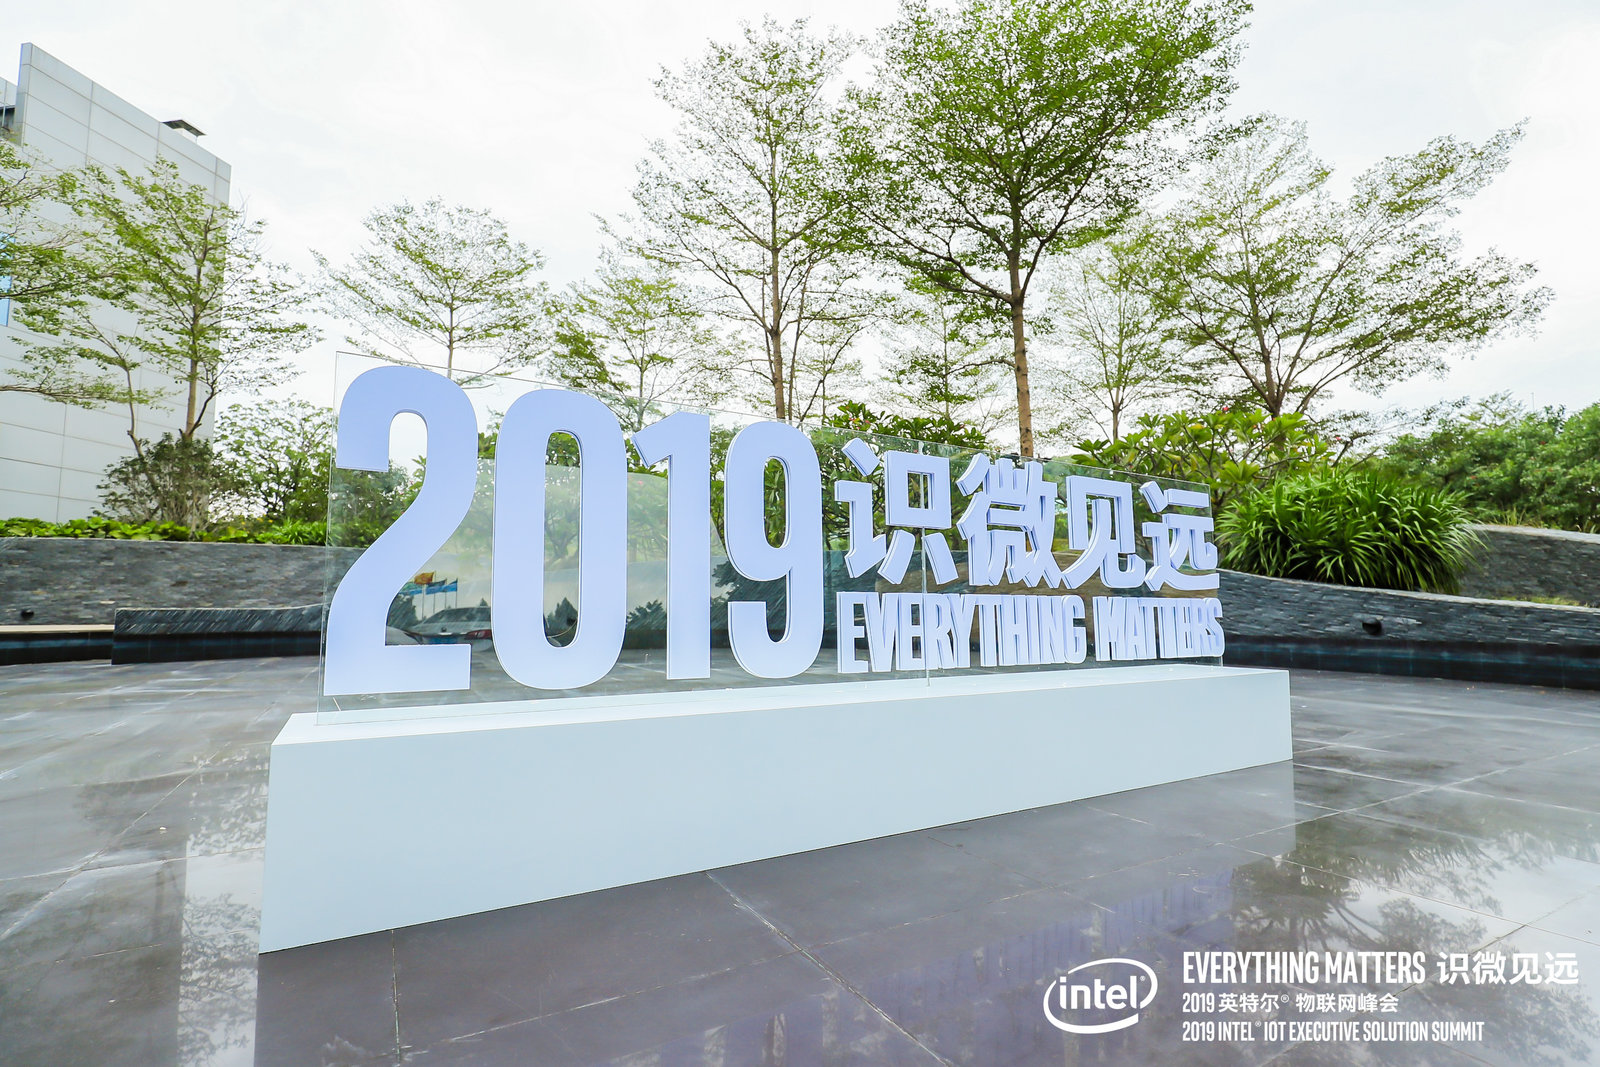 Intel IoT Executive Solution Summit - Everything Matters